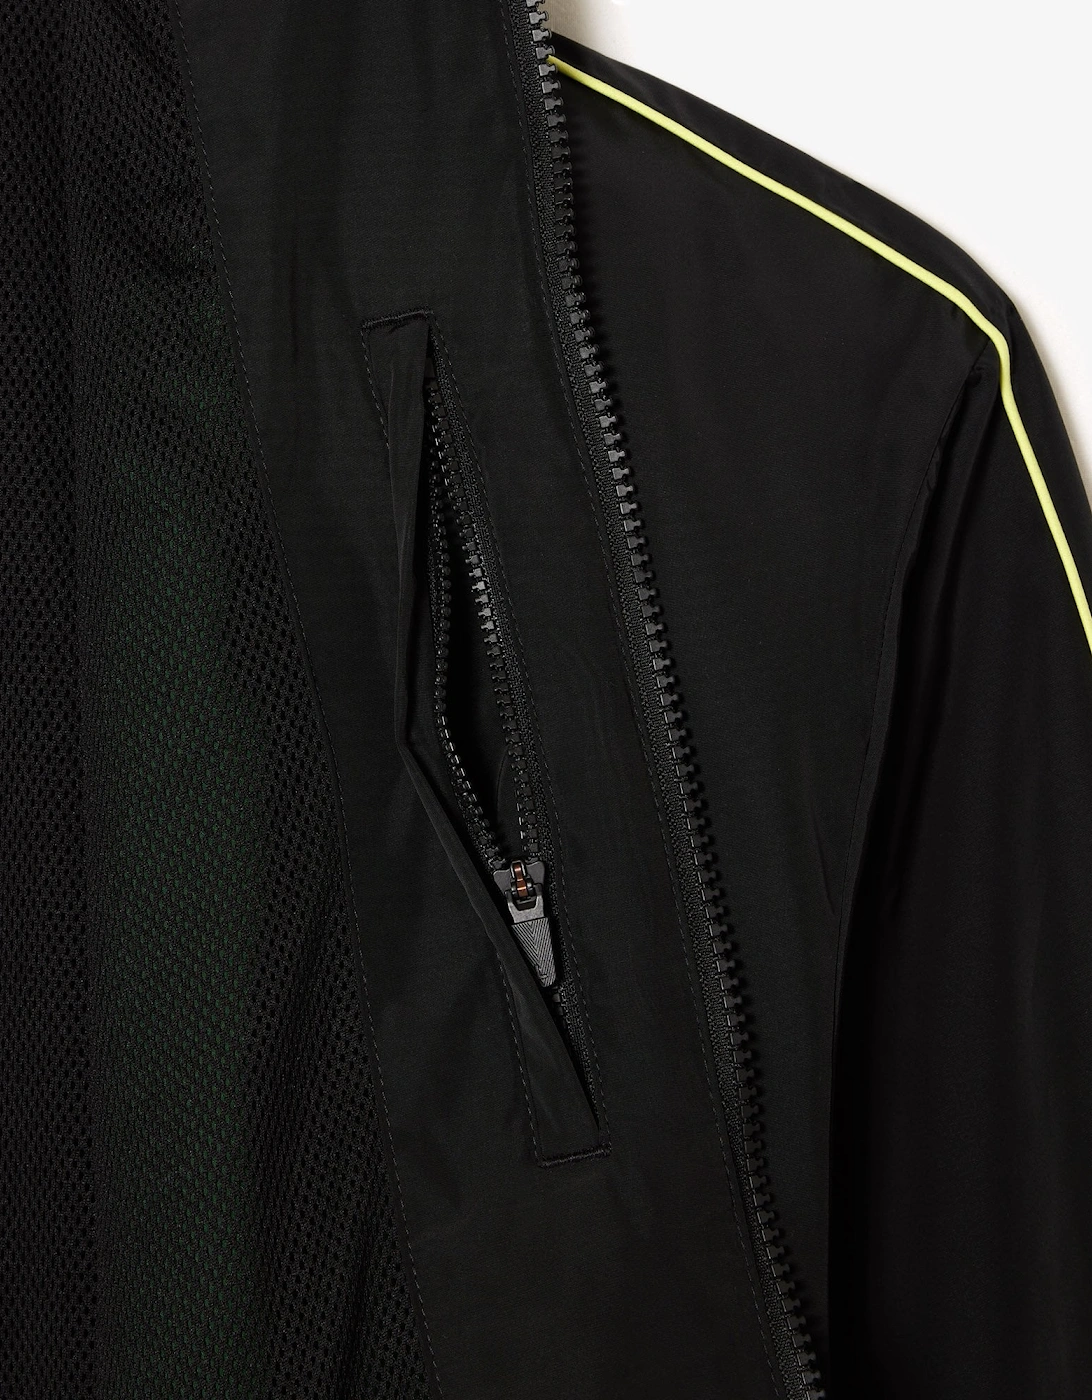 Men's Black And Yellow Contrast Water resistant Sports Jacket